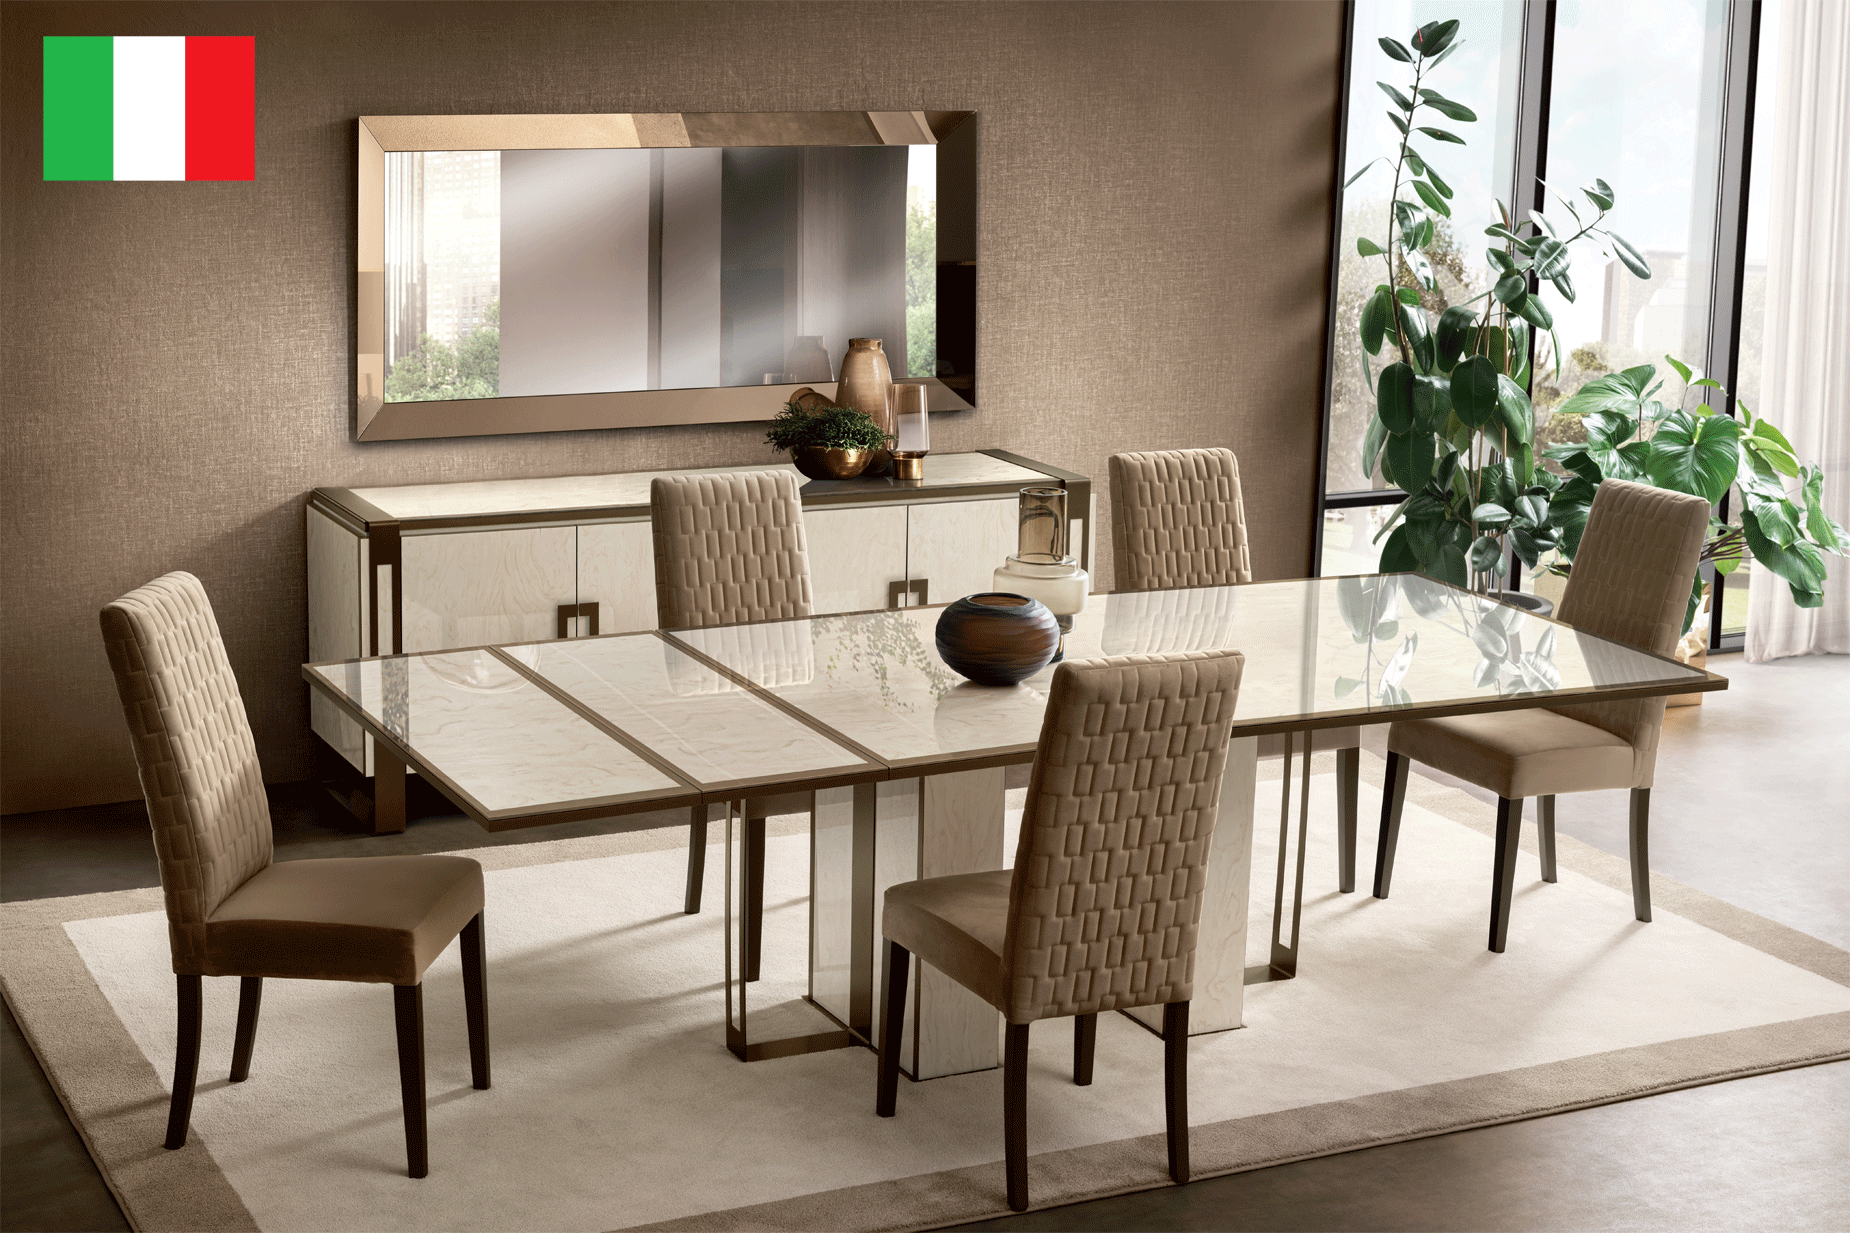 Brands Camel Classic Collection, Italy Poesia Dining Room